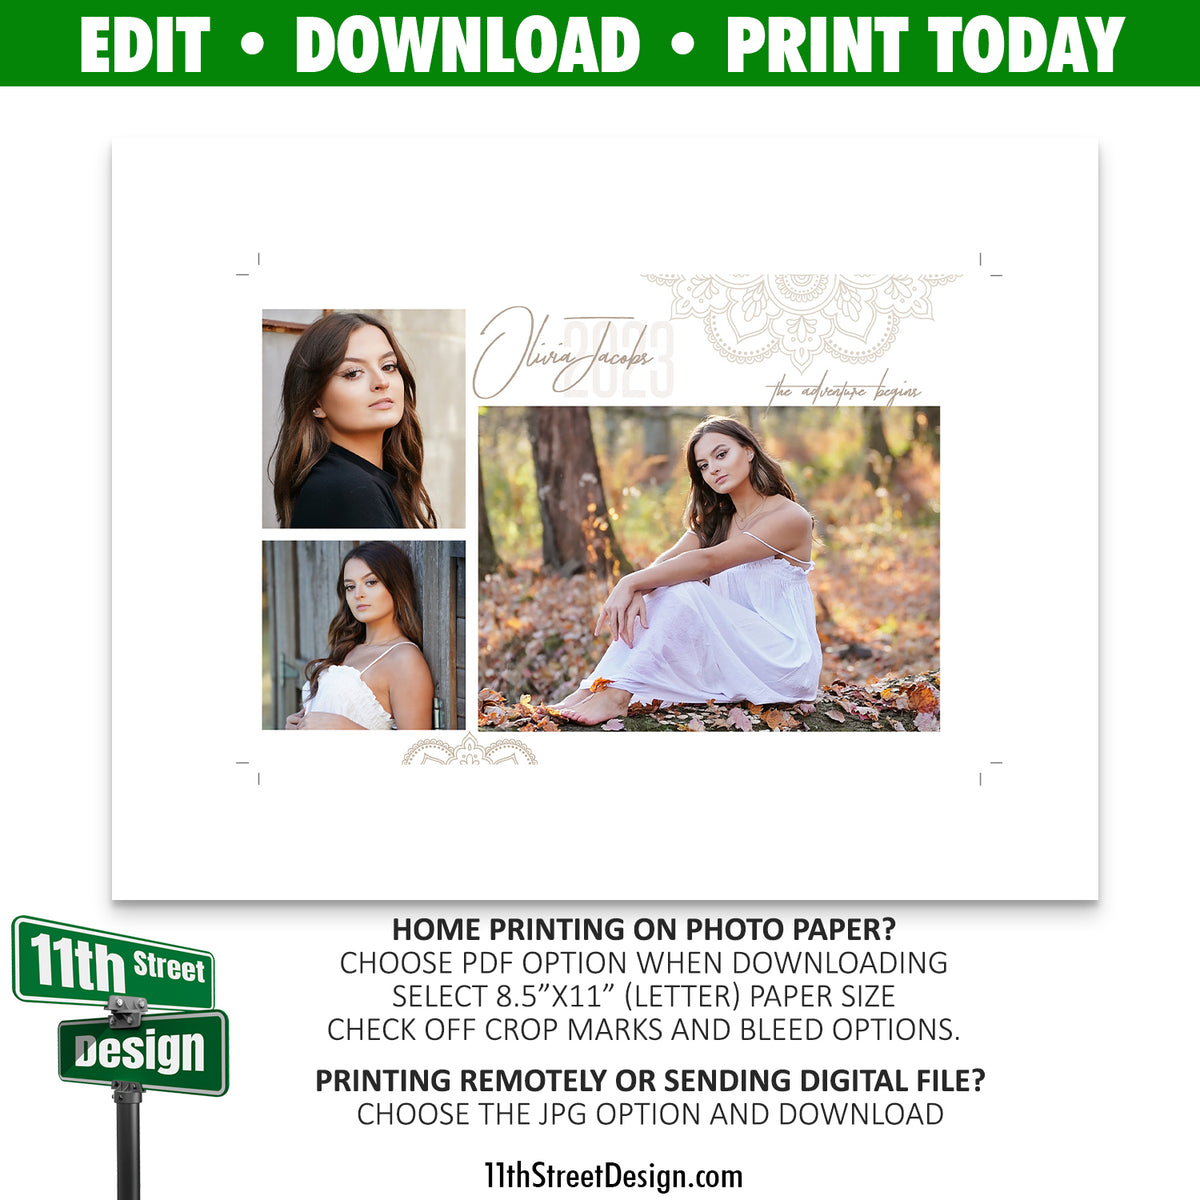 Instant Yearbook Ads • Edit Now Print Today! • Program Recognition Ad Template • Edit Online • Digital Download • Adventure Begins